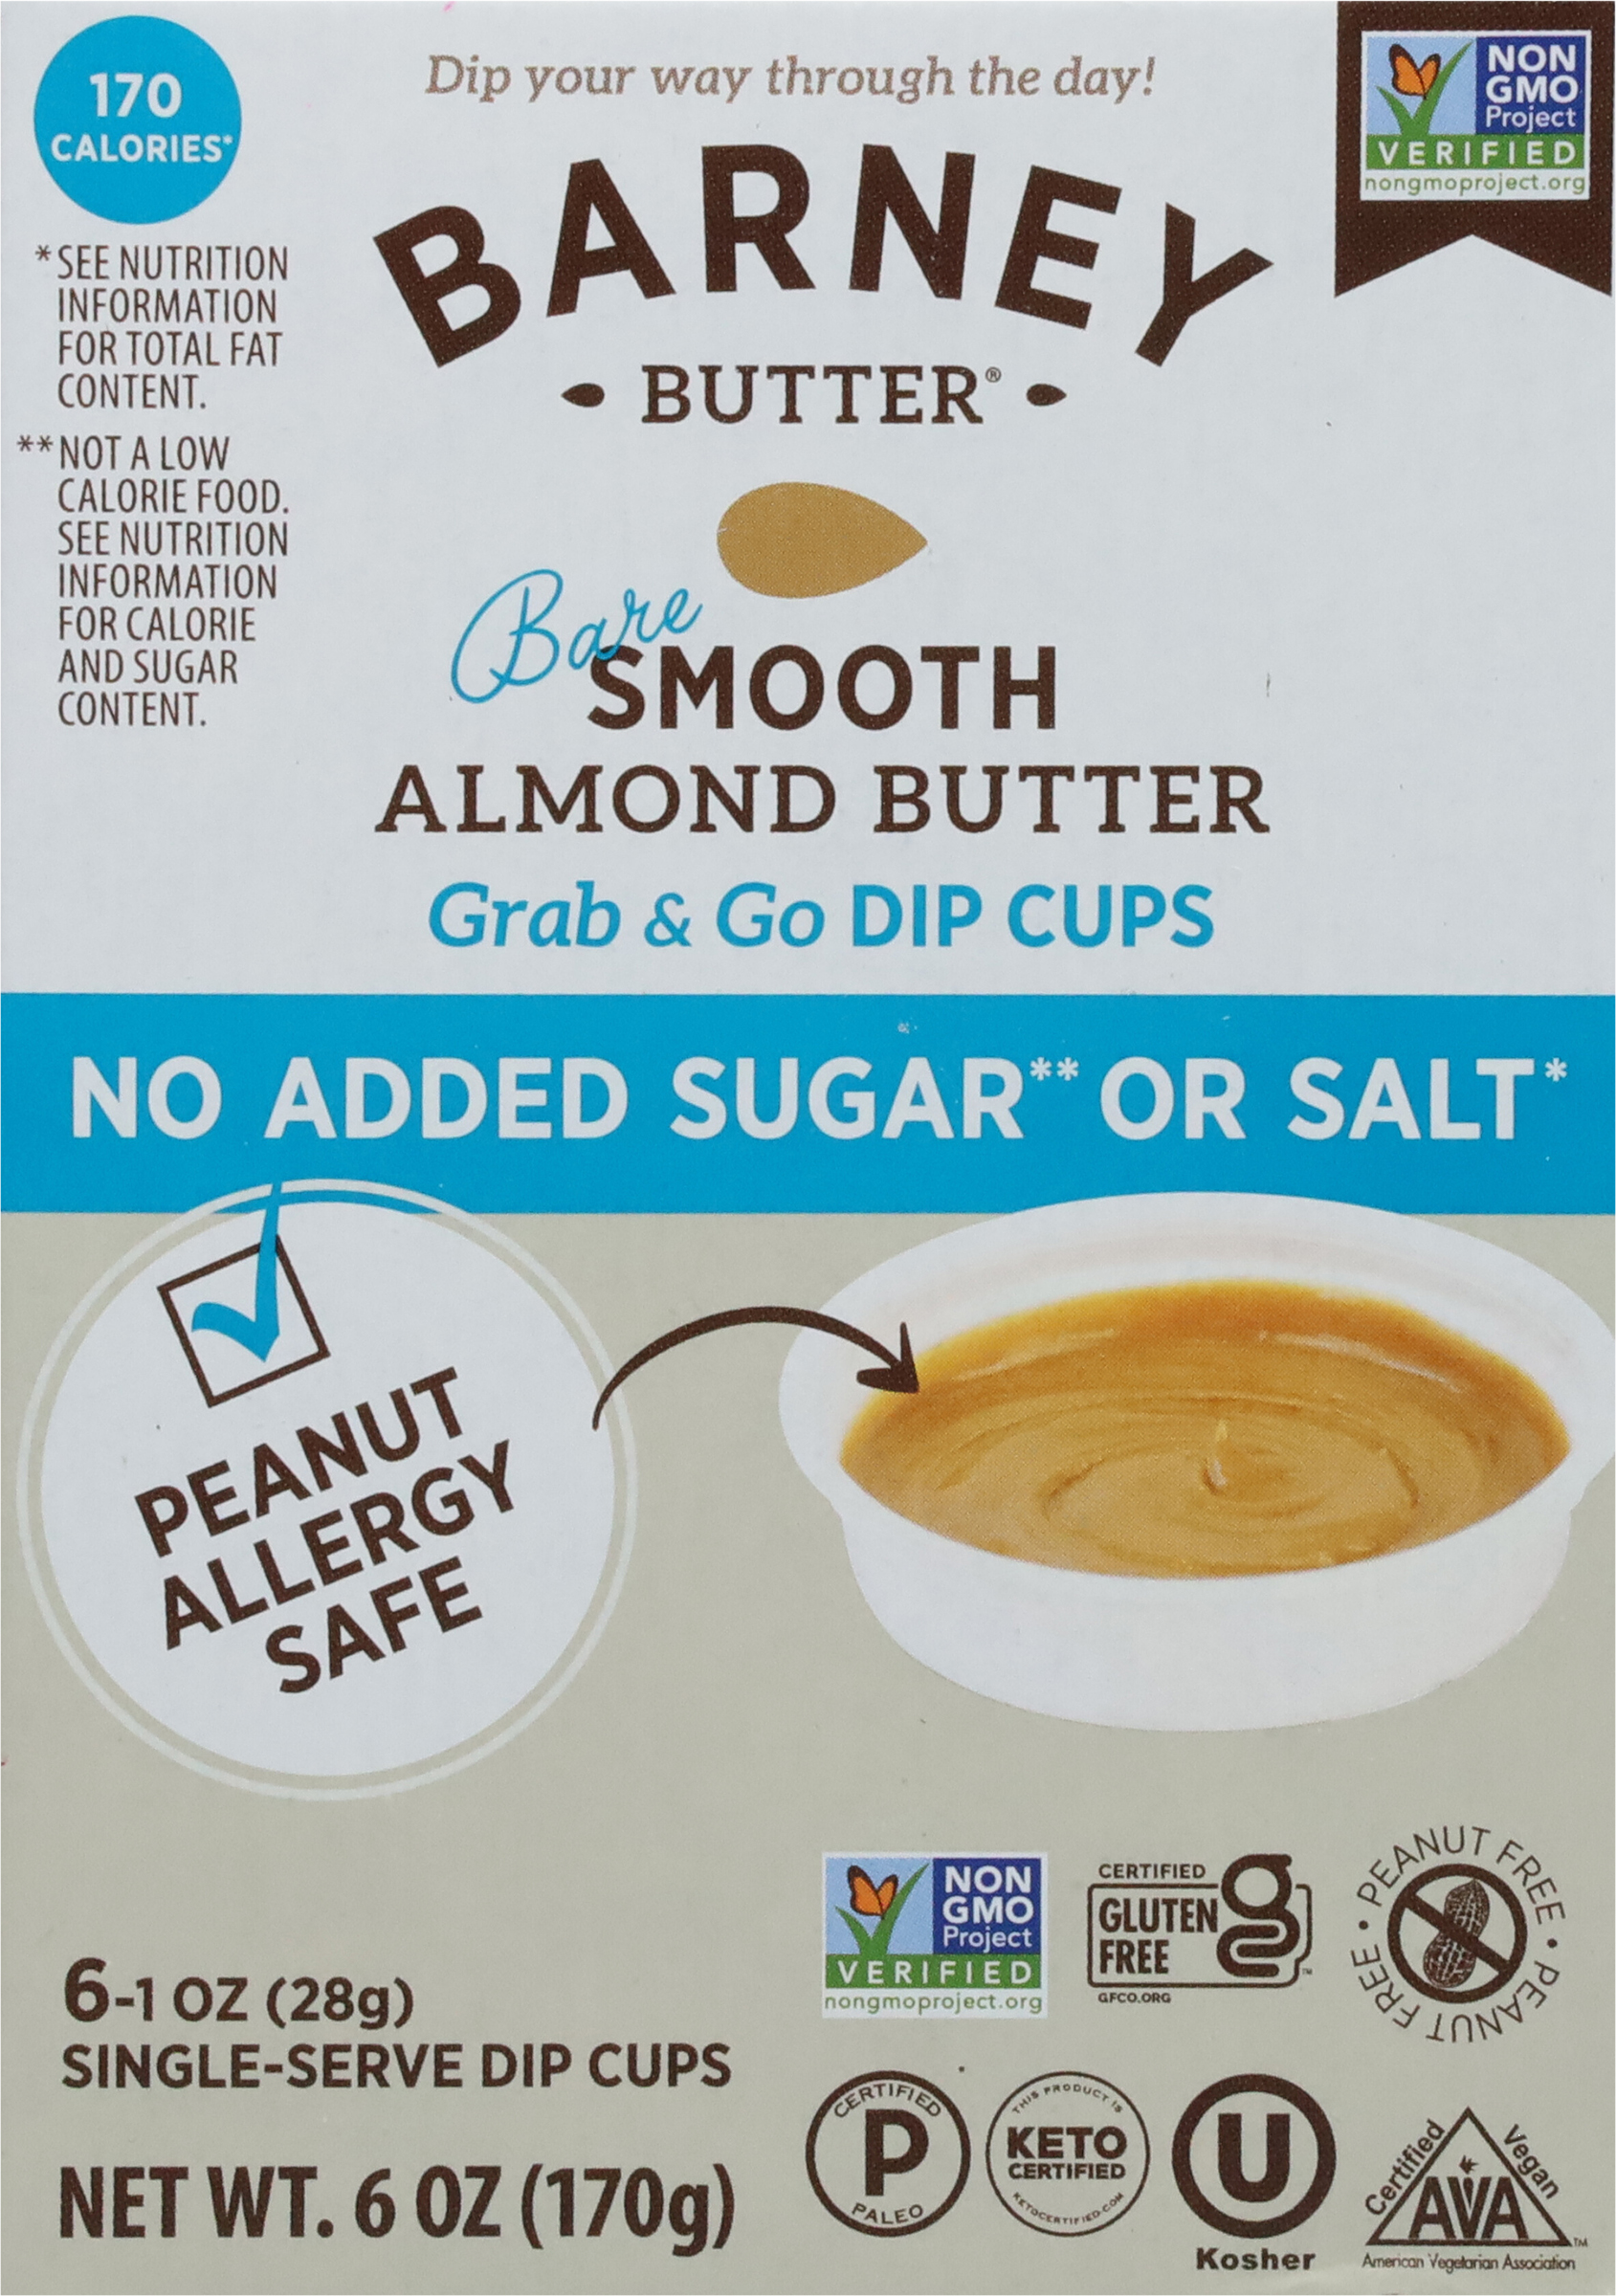 Almond Butter, Bare Smooth, Grab & Go Dip Cups